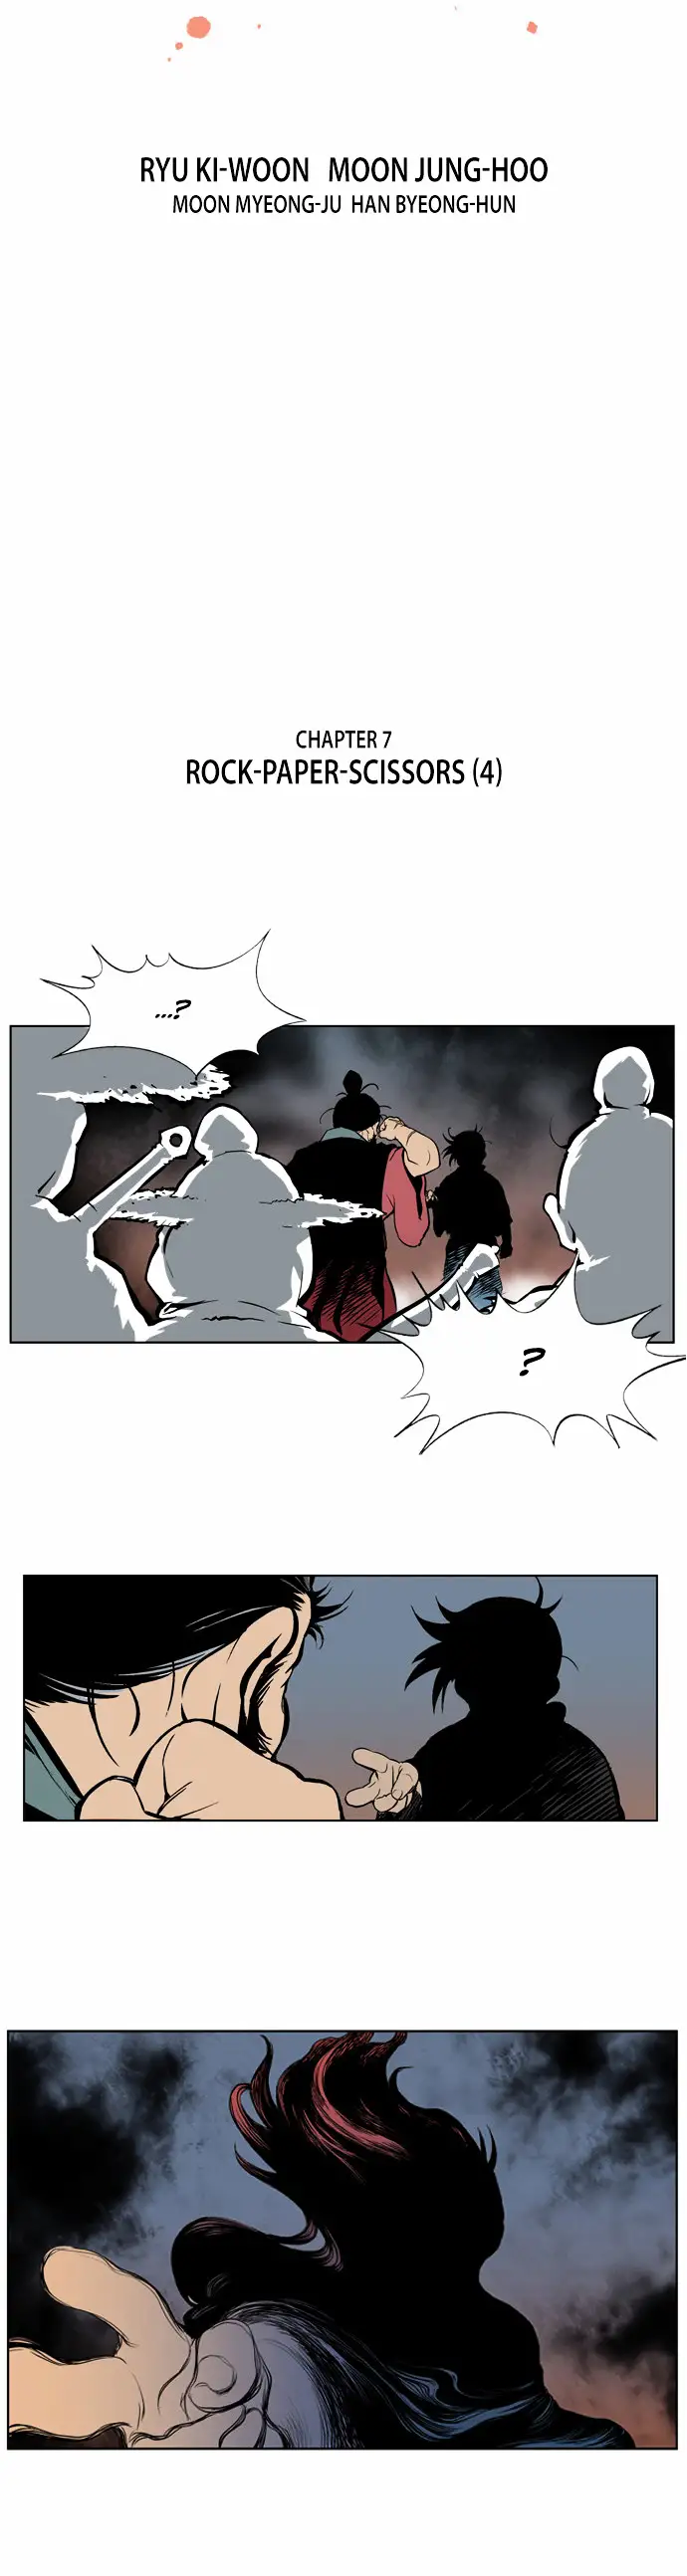 Gosu (The Master) - Chapter 7 Page 4